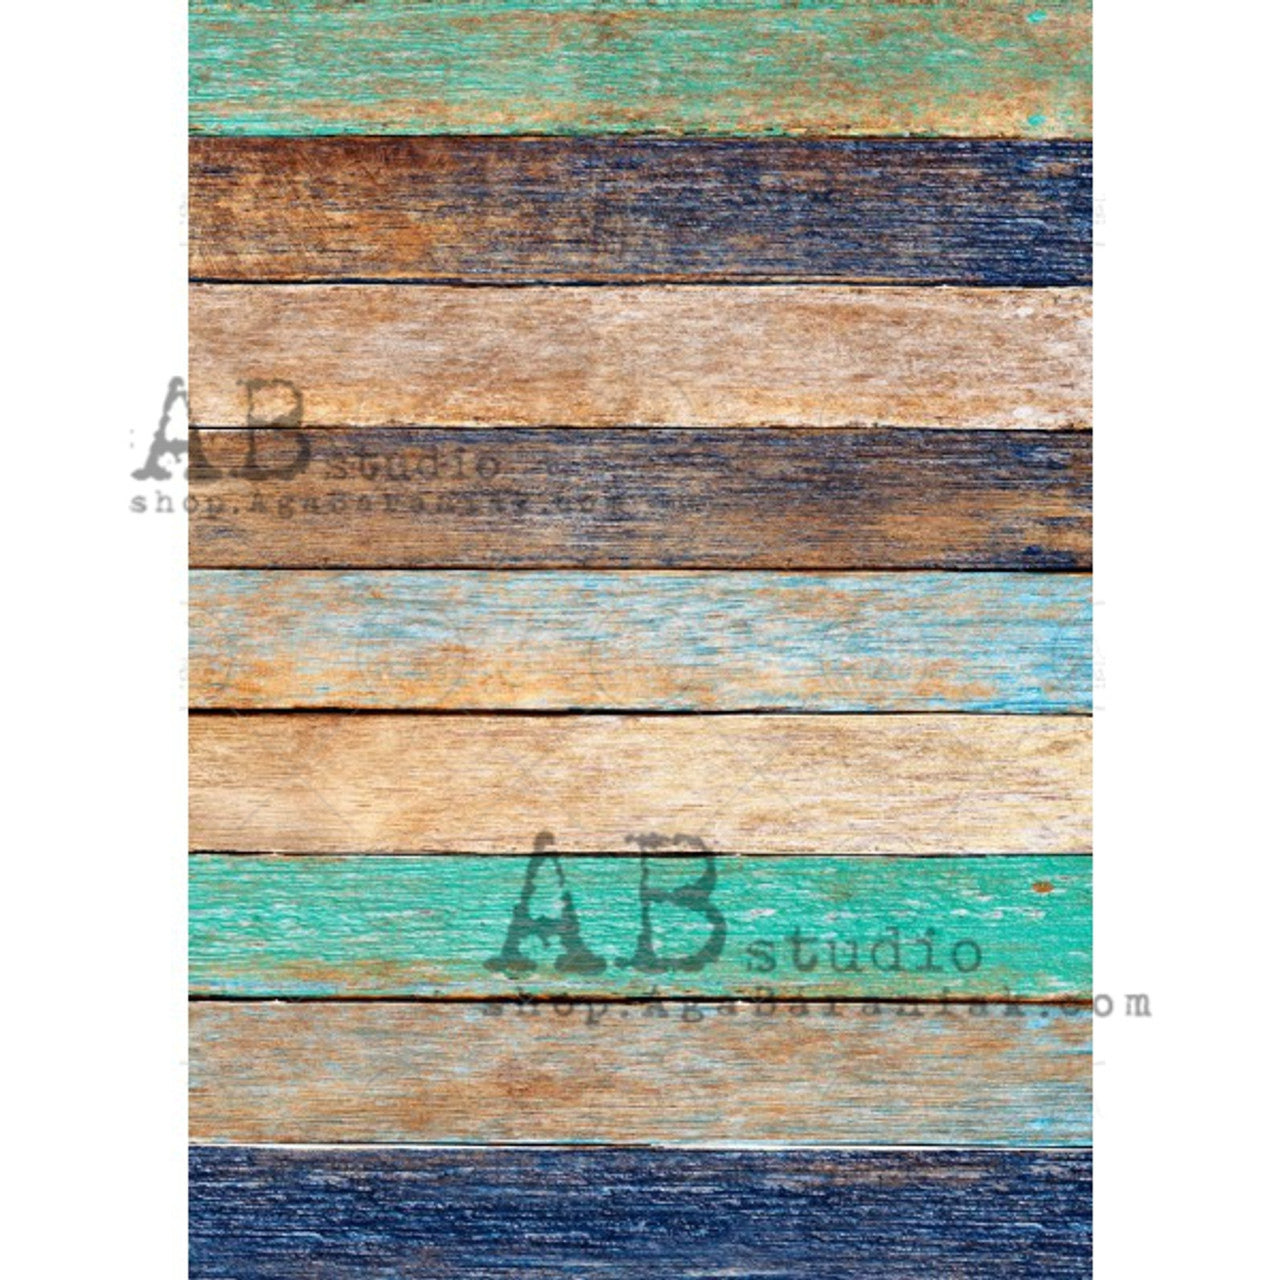 Stained Wood-0114